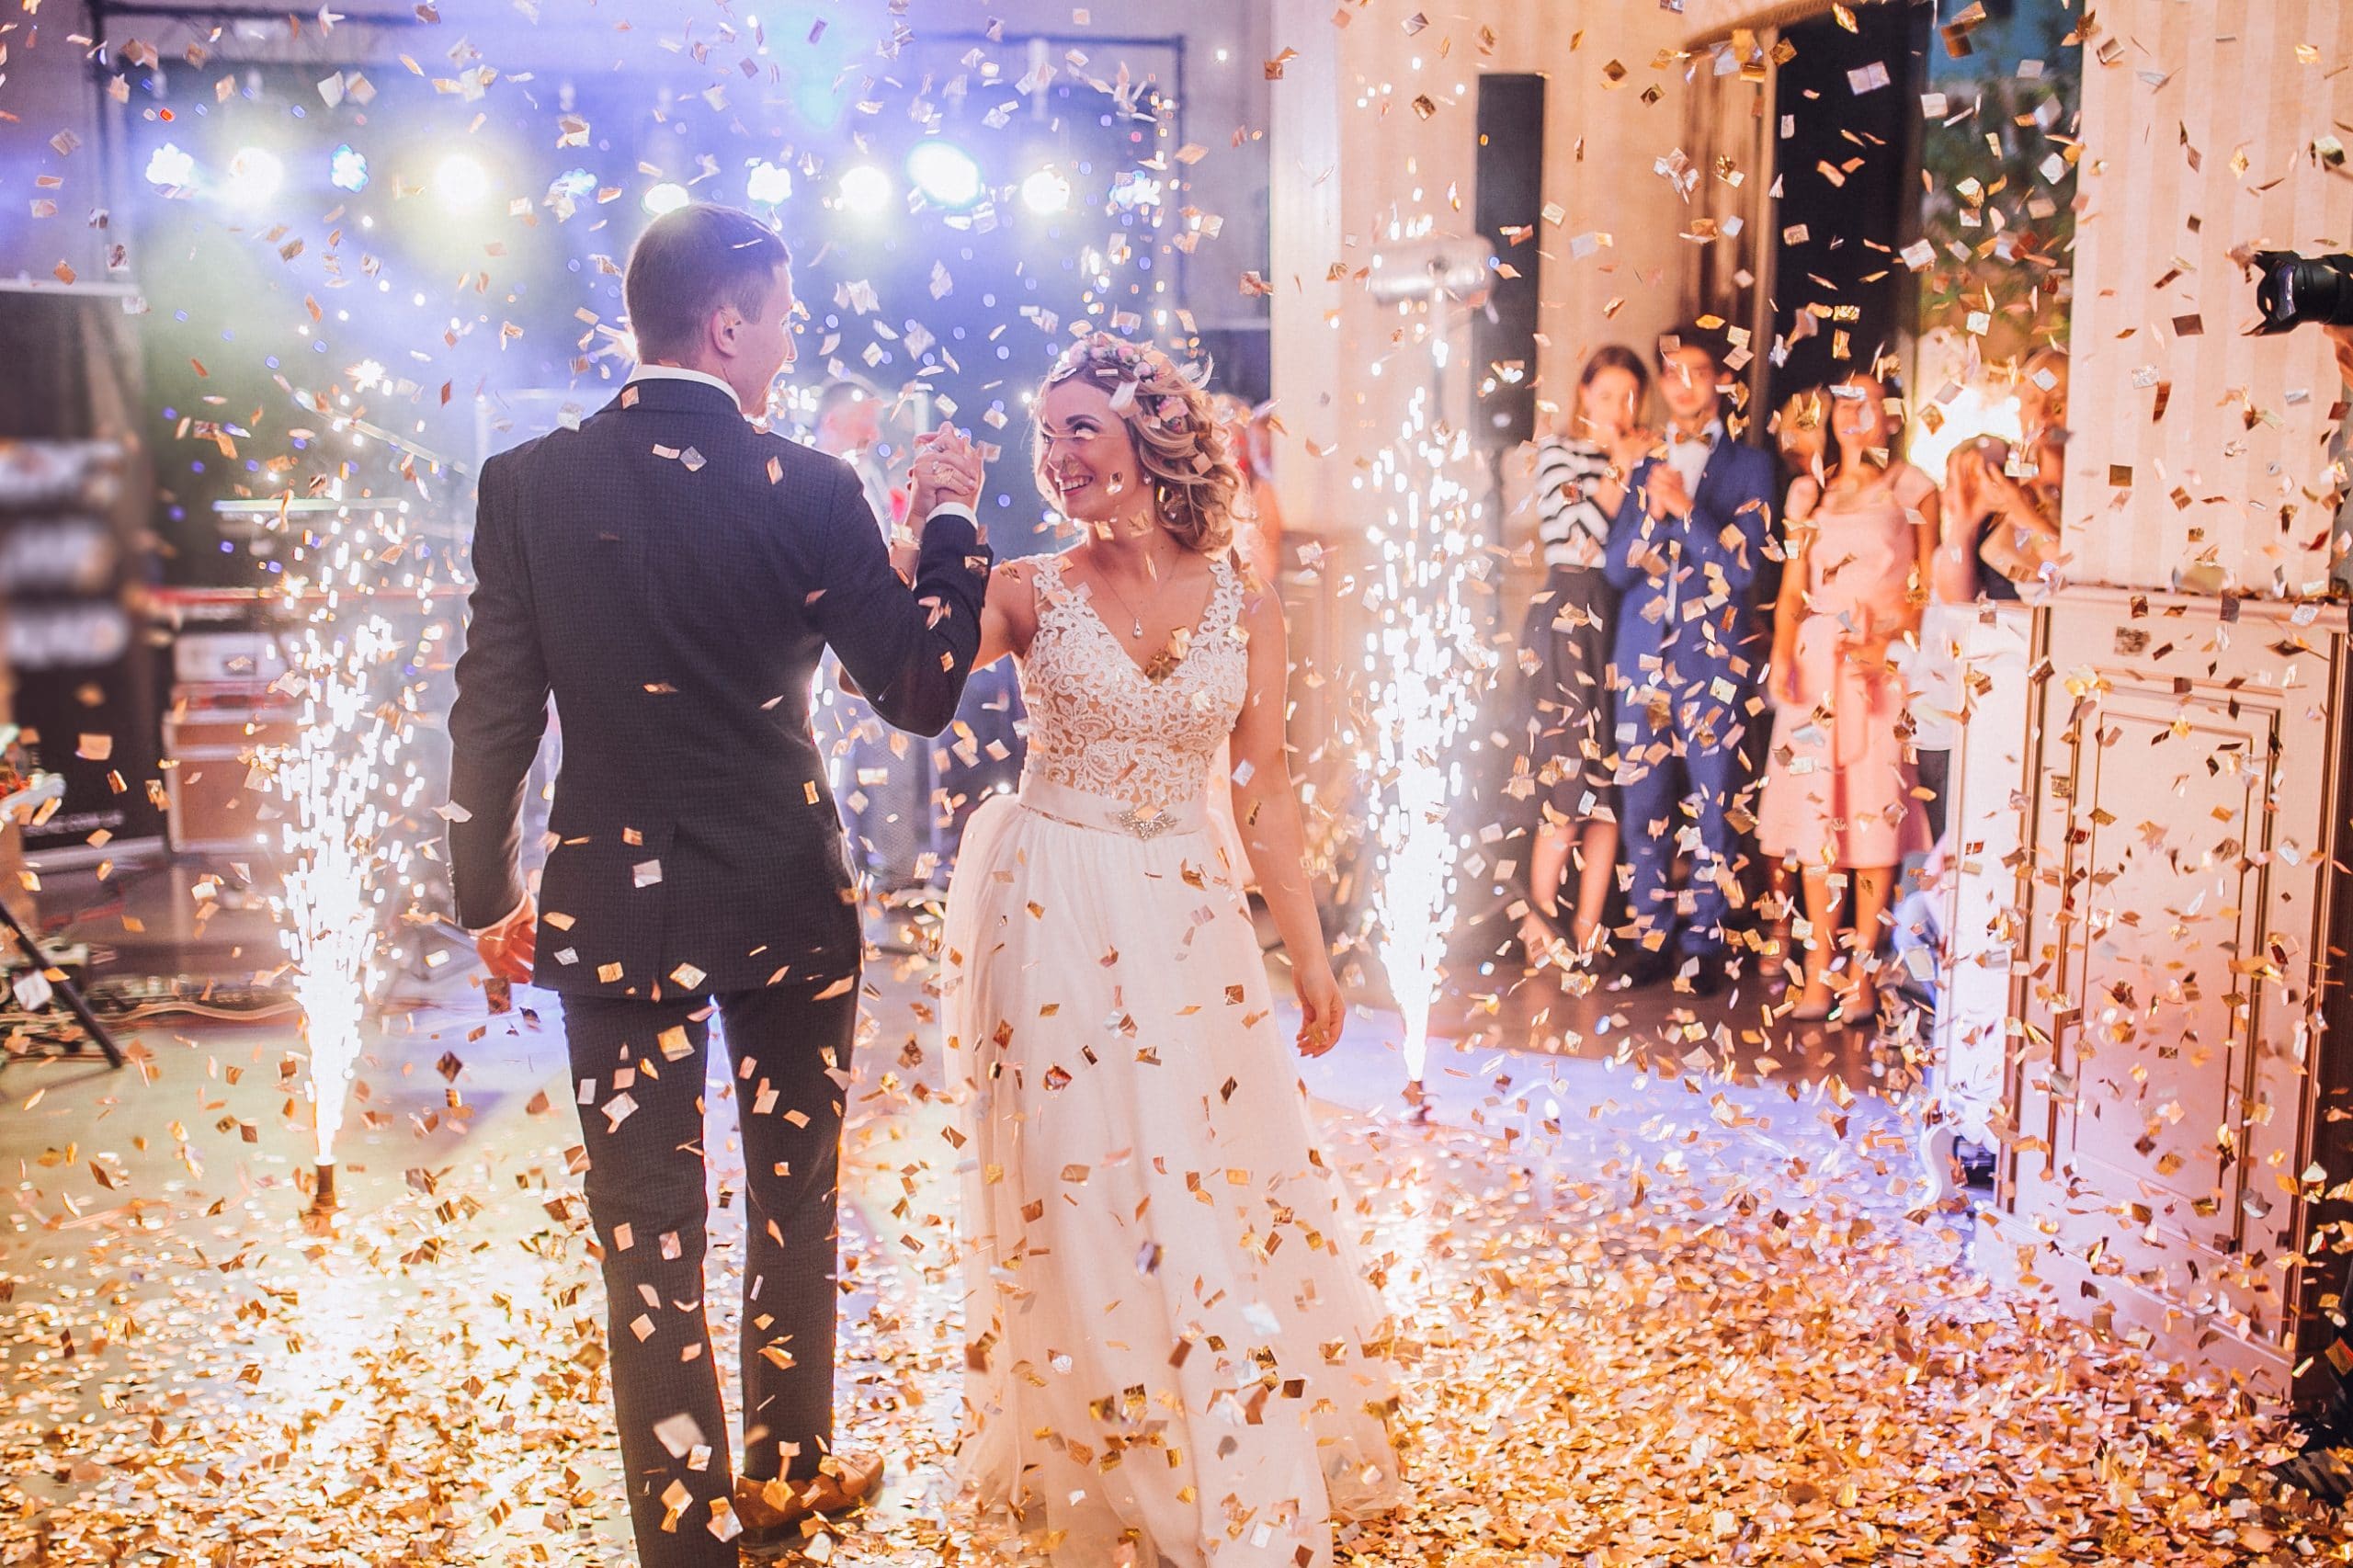 YOUR WEDDING SONG 2019 evening TABLE CONFETTI includes FIRST DANCE LYRICS 